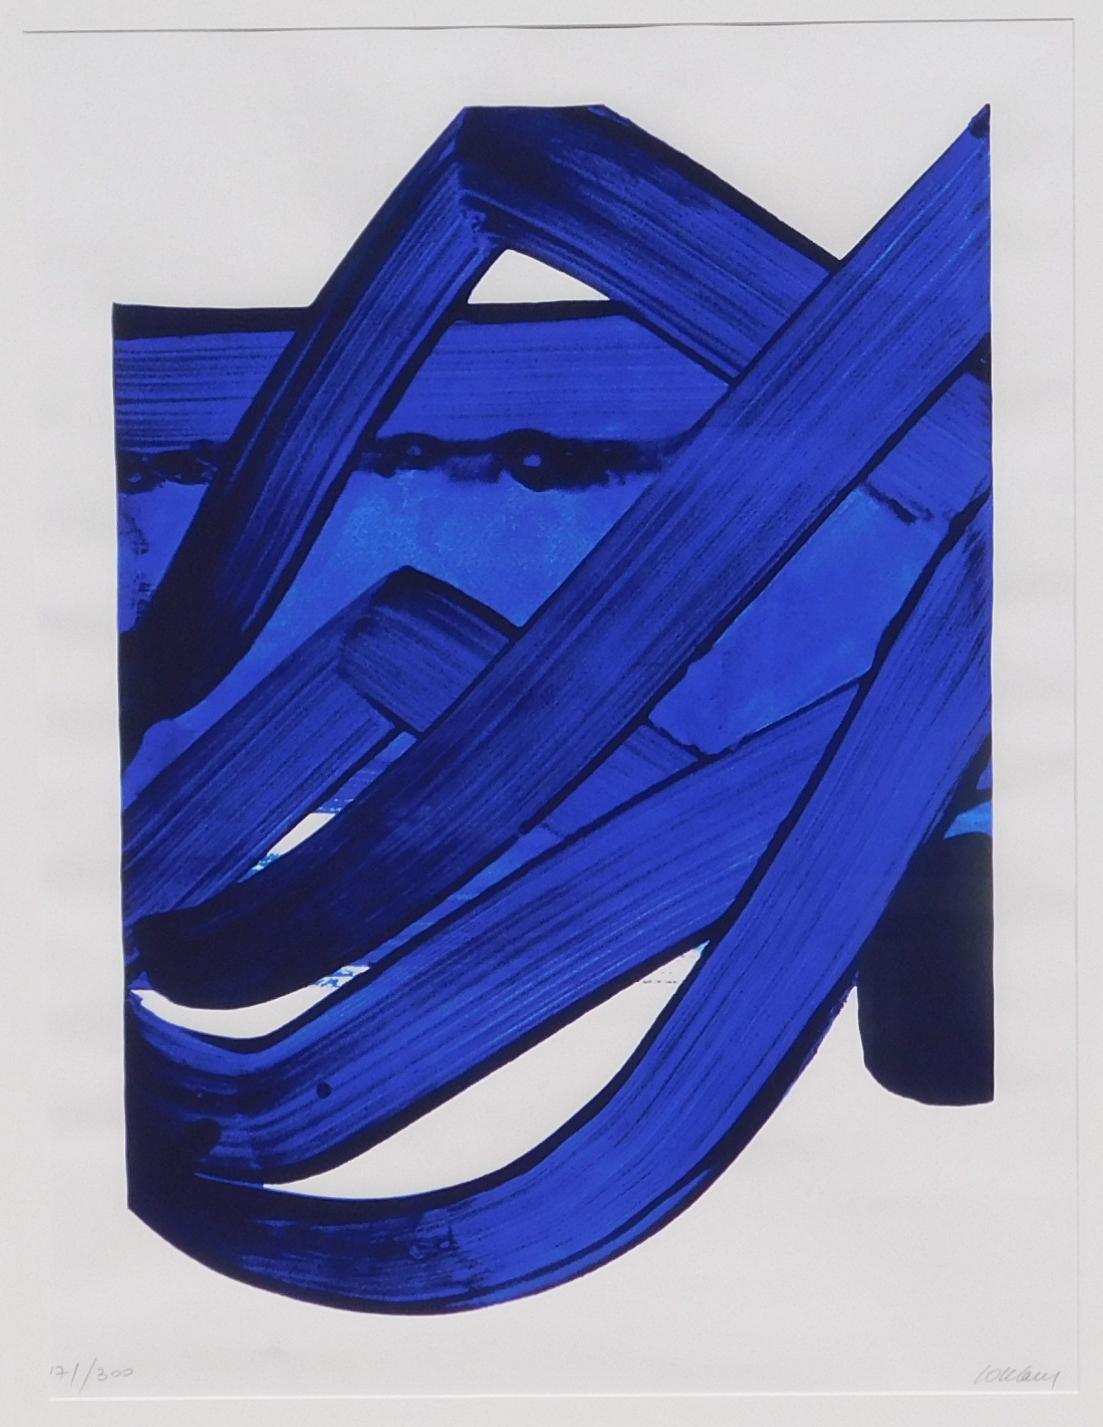 Original serigraph (serigraphie) in colors by French artist Pierre Soulages (1919 - 2022).
From The Official Arts Portfolio of XXIV Olympiad, Seoul, Korea. Edition size is 171 of 300. 
Unframed and presents in a 4-ply museum mat. Mat size: 39